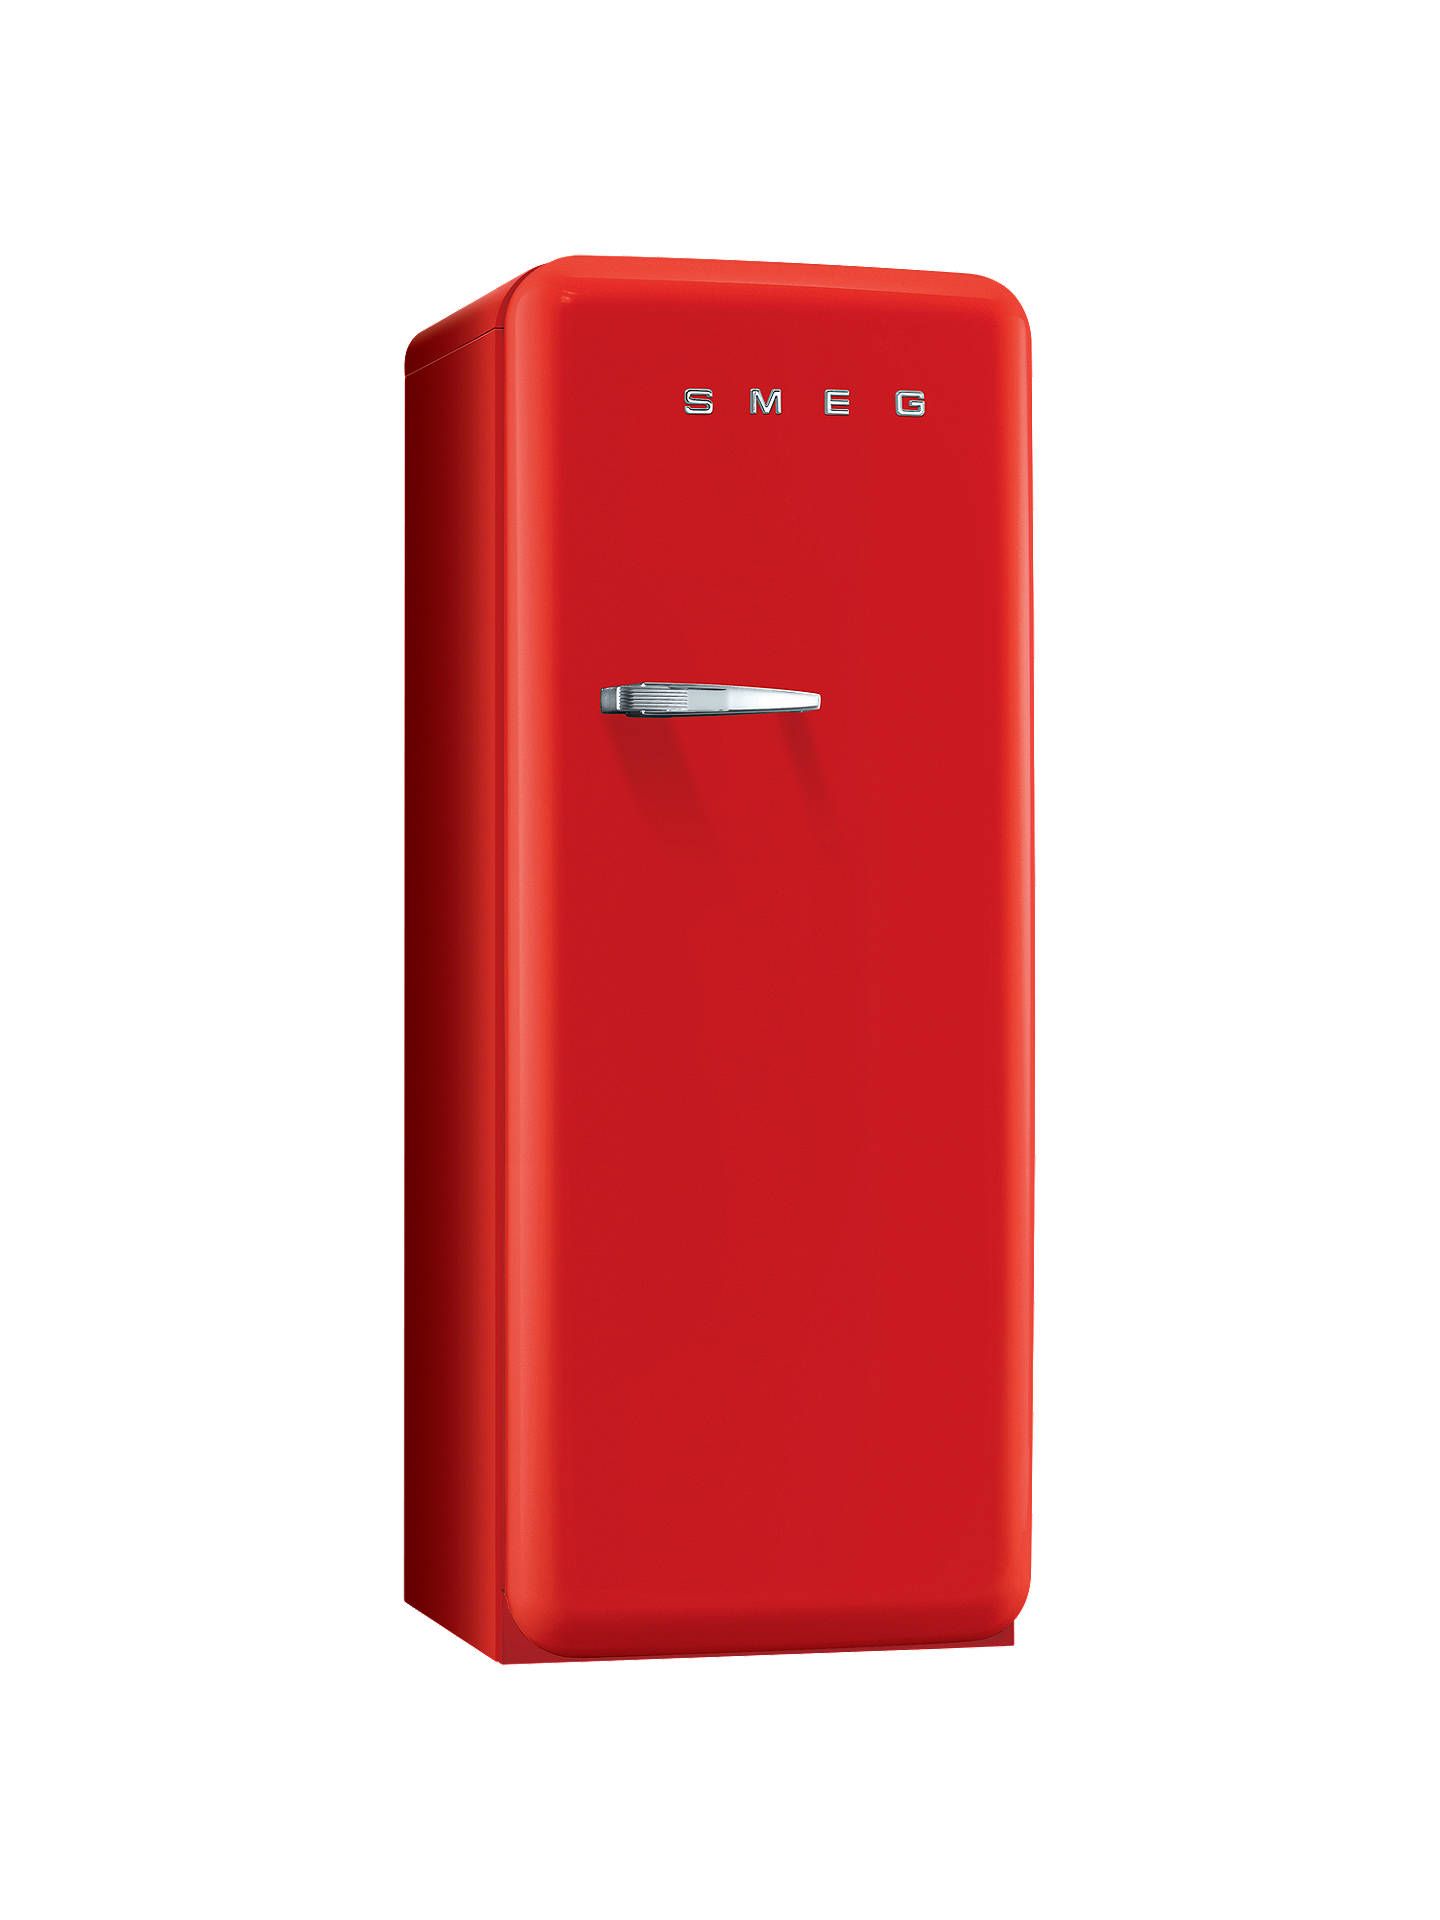 1 SMEG FAB28Q RED RETRO FRIDGE WITH FREEZER COMPARTMENT RRP Â£1199 (POWERS ON, GENERIC IMAGE GUIDE)